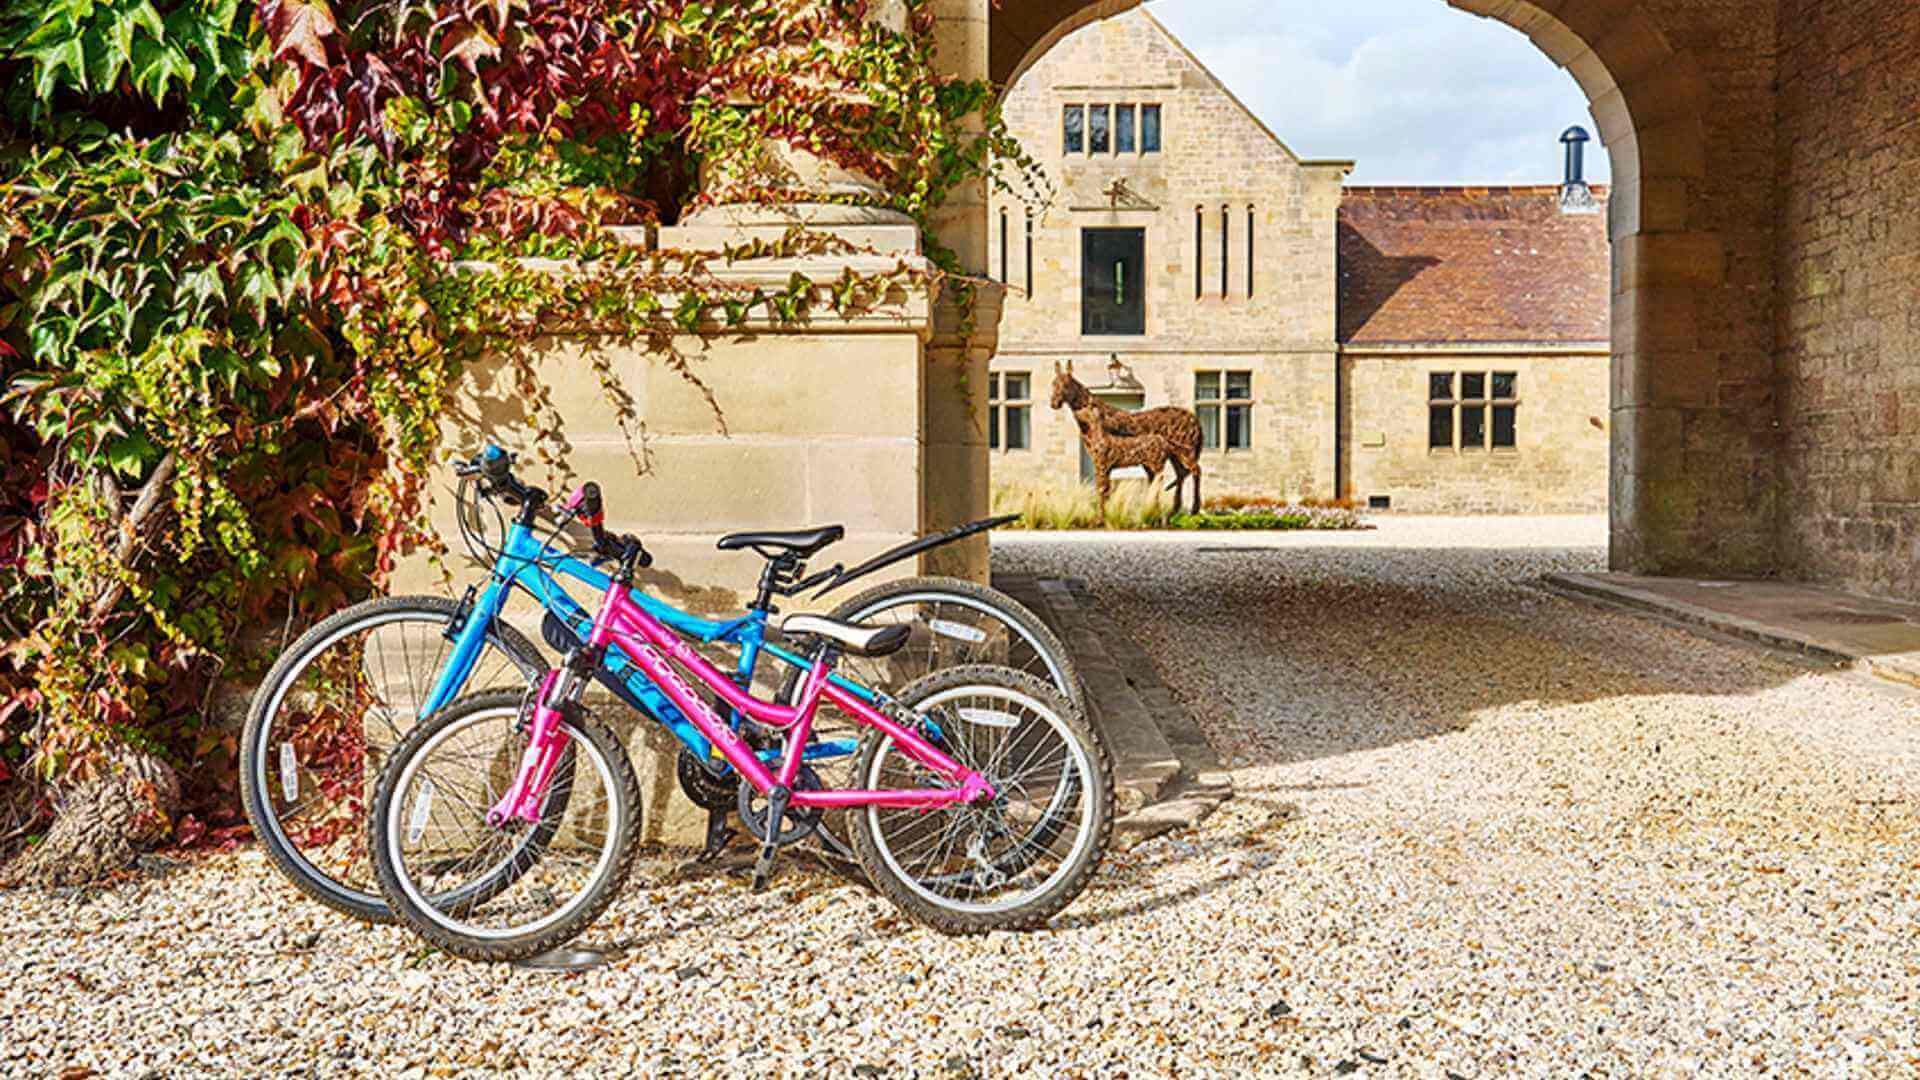 Cycle friendly at Chesters Stables